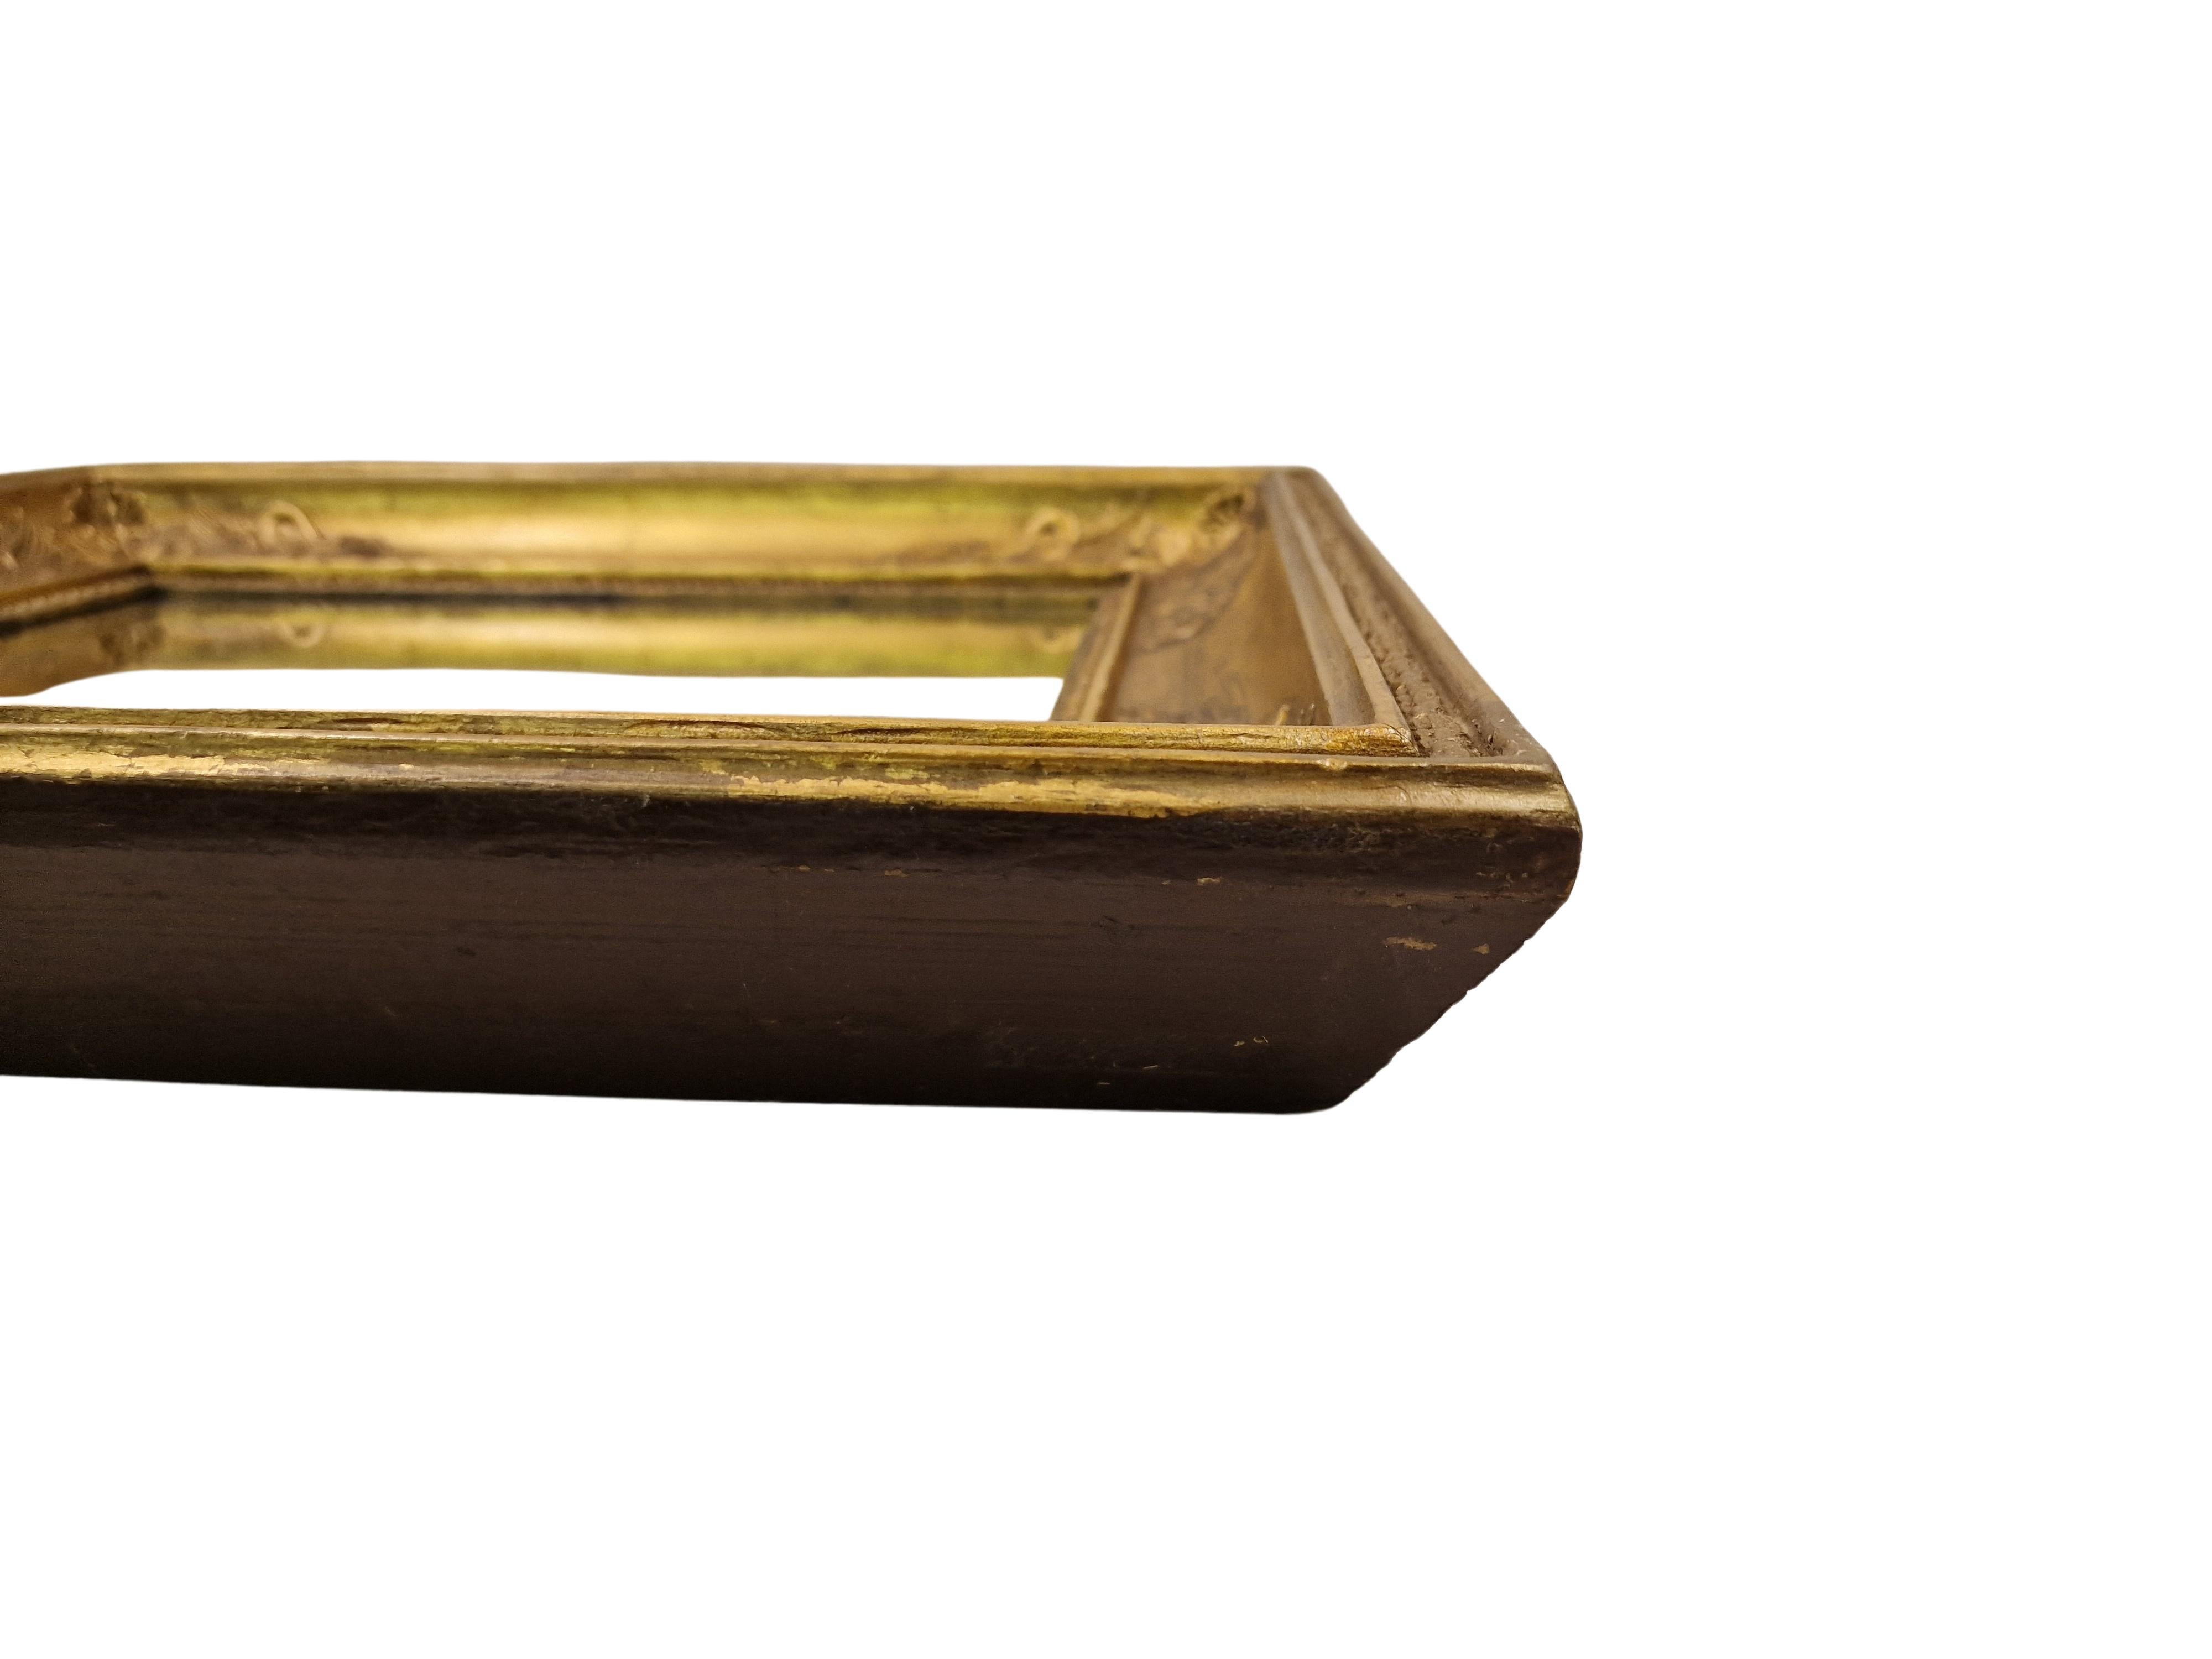 Wonderful wall mirror from the Empire period, around 1820, made in Vienna, Austria, Europe. 

The mirror is in impressive good condition, only the mirror plate has been renewed to enable it to be used. 
This gilt mirror, circa 200 years old, has